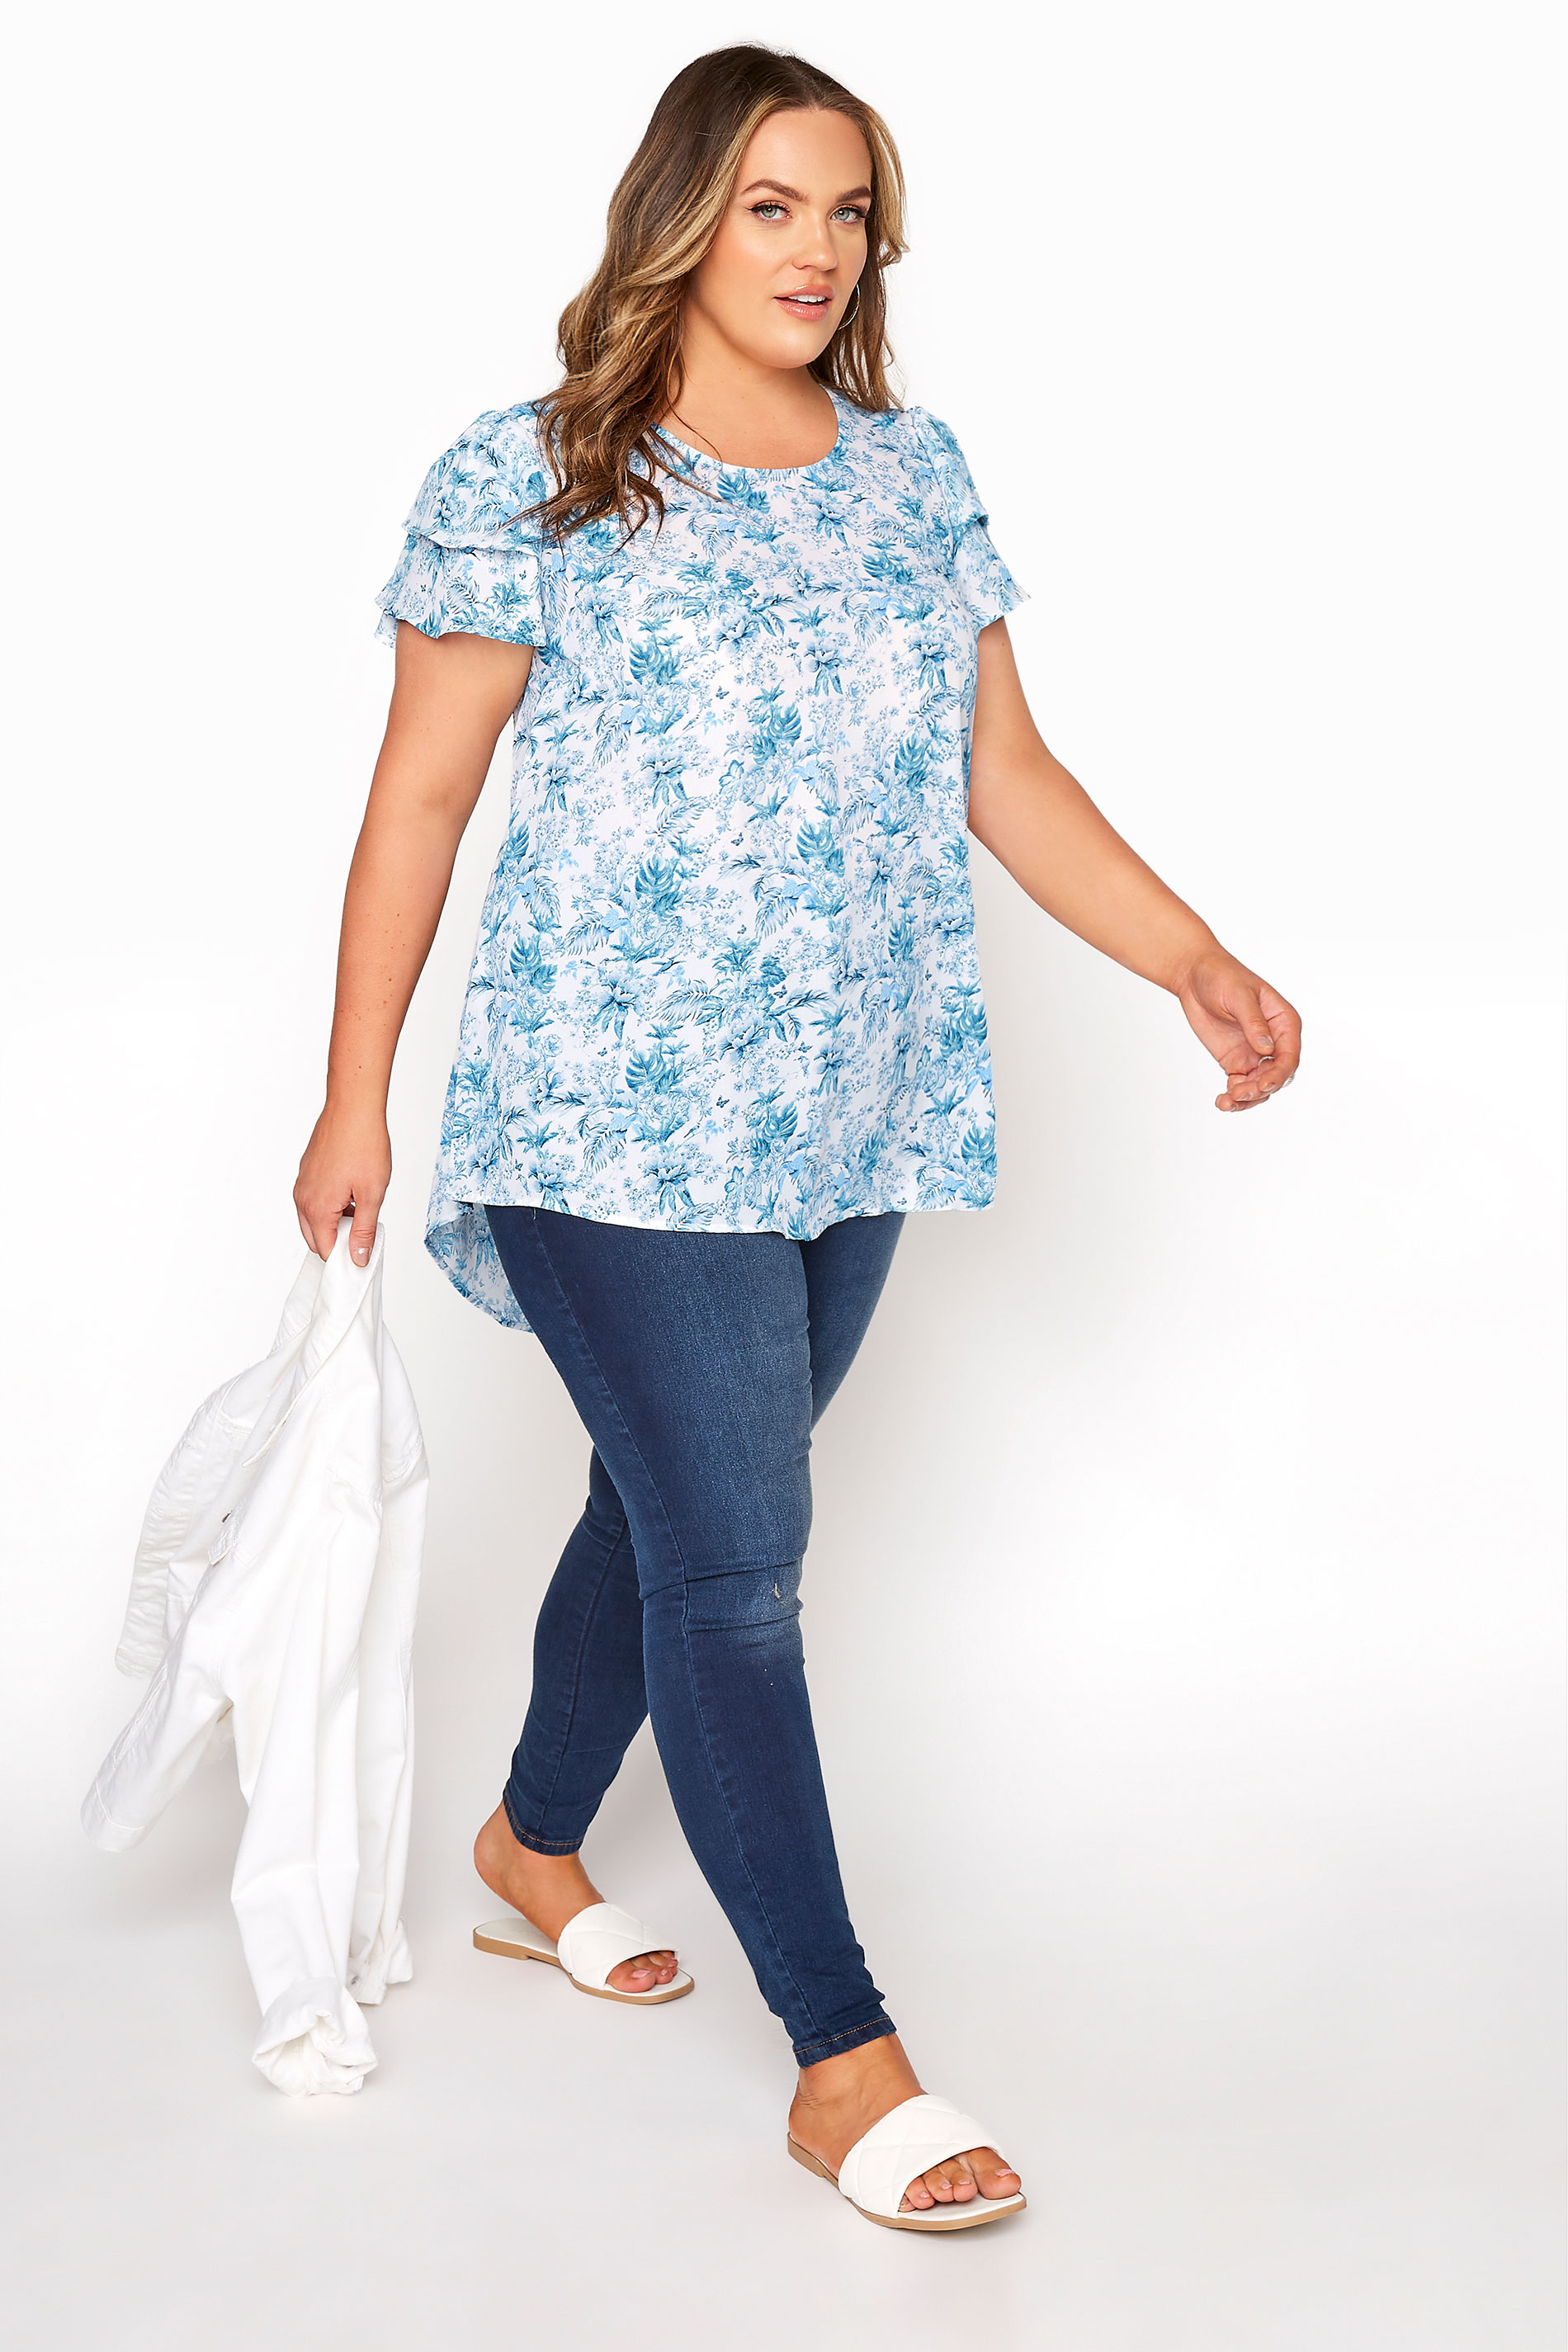 Grande taille  Tops Grande taille  Tops Casual | Blouse Blanche Floral Tropical Ourlet Plongeant - UN31046